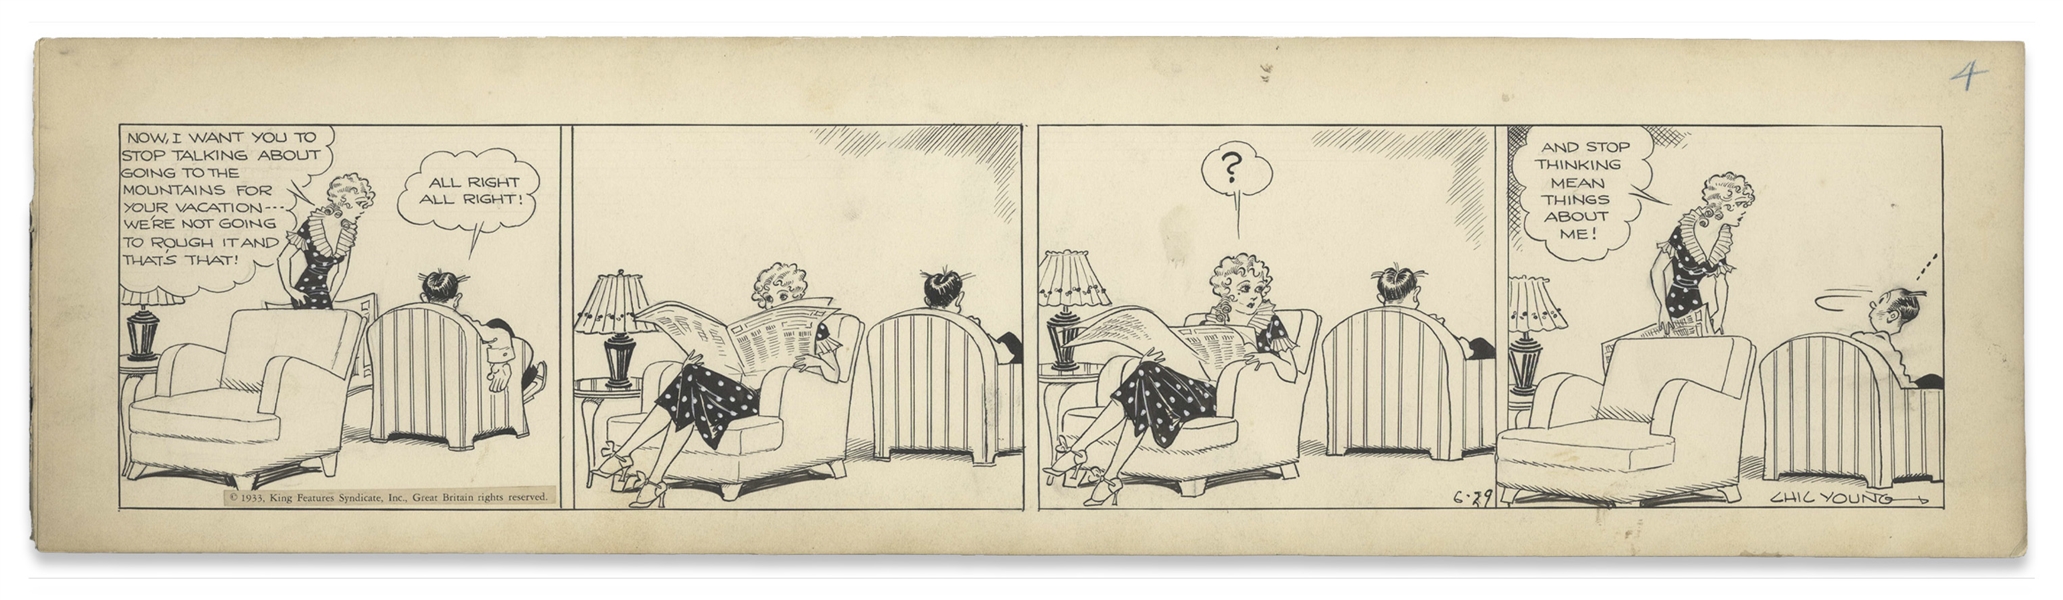 Chic Young Hand-Drawn ''Blondie'' Comic Strip From 1933 Titled ''The Crystal Gazer'' -- Blondie's Wifely Intuition on Display